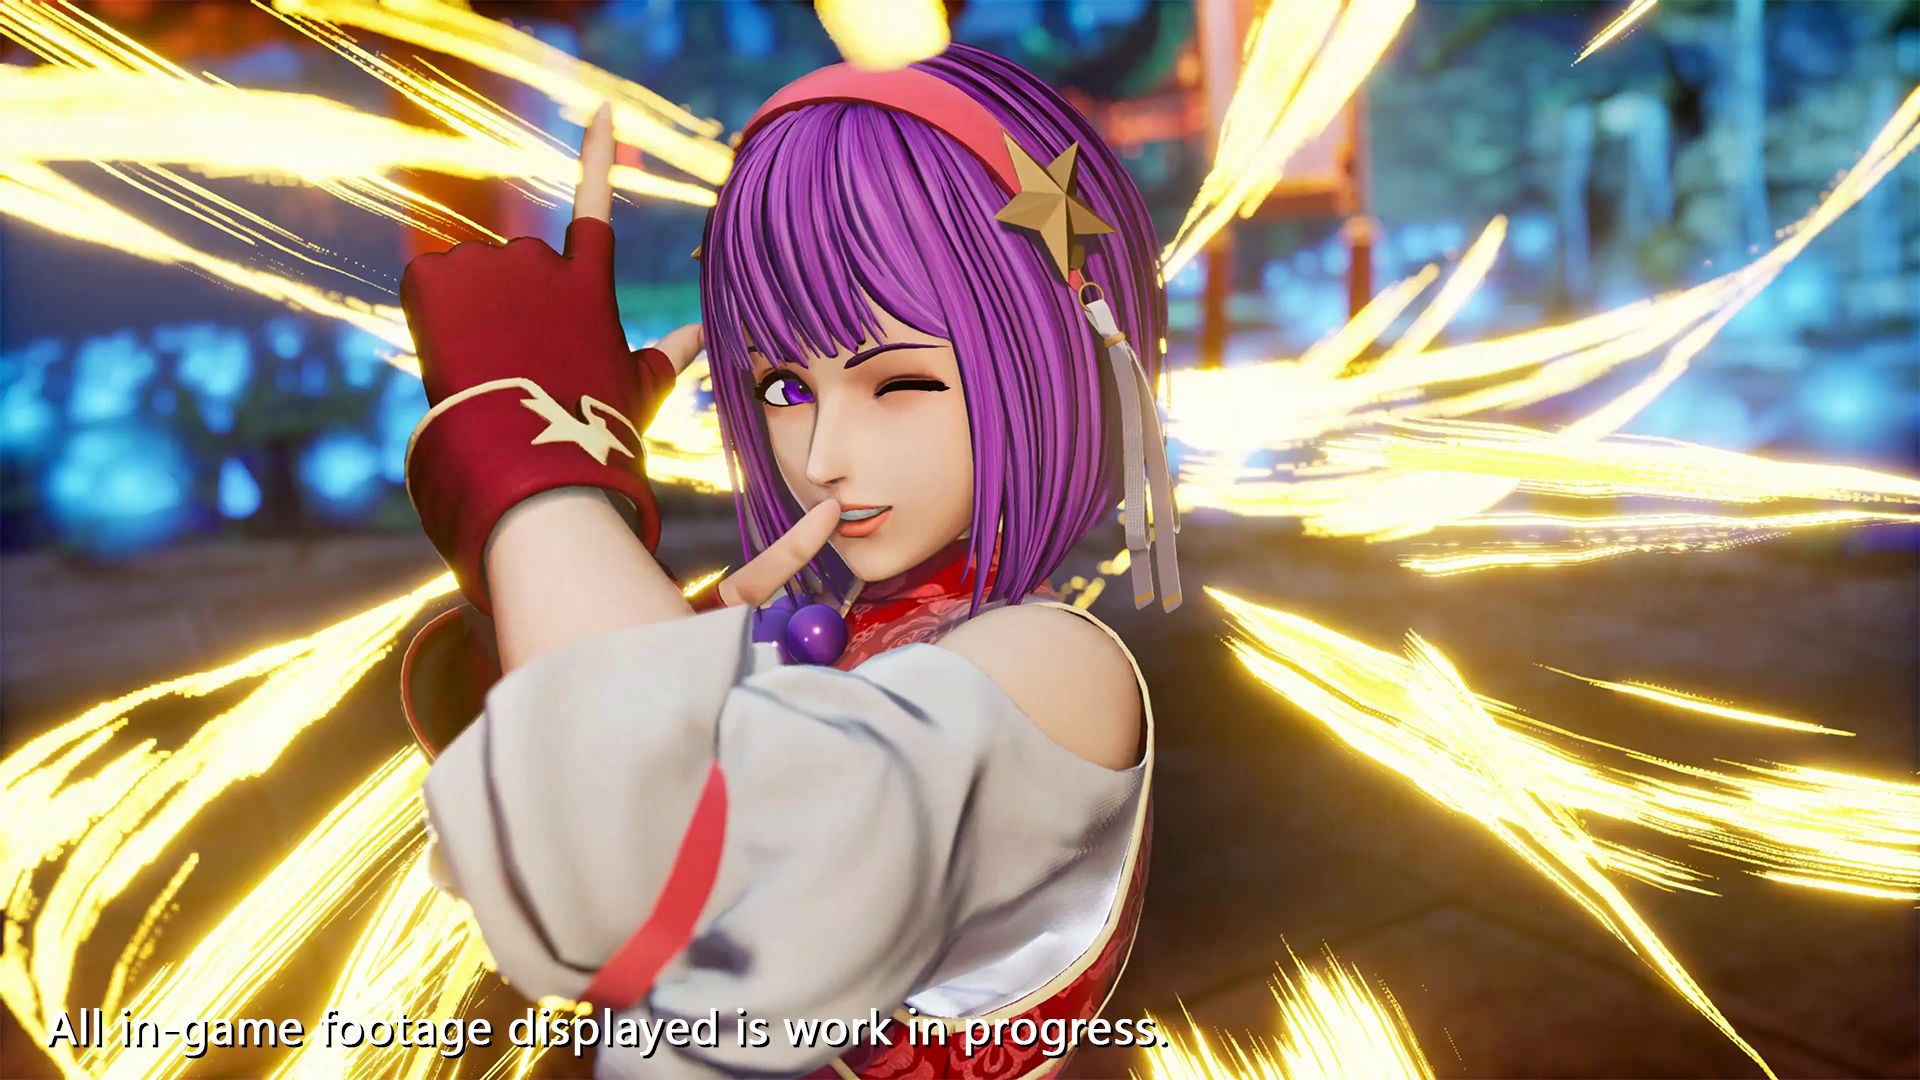 King of Fighters 15 - Official Release Date Trailer